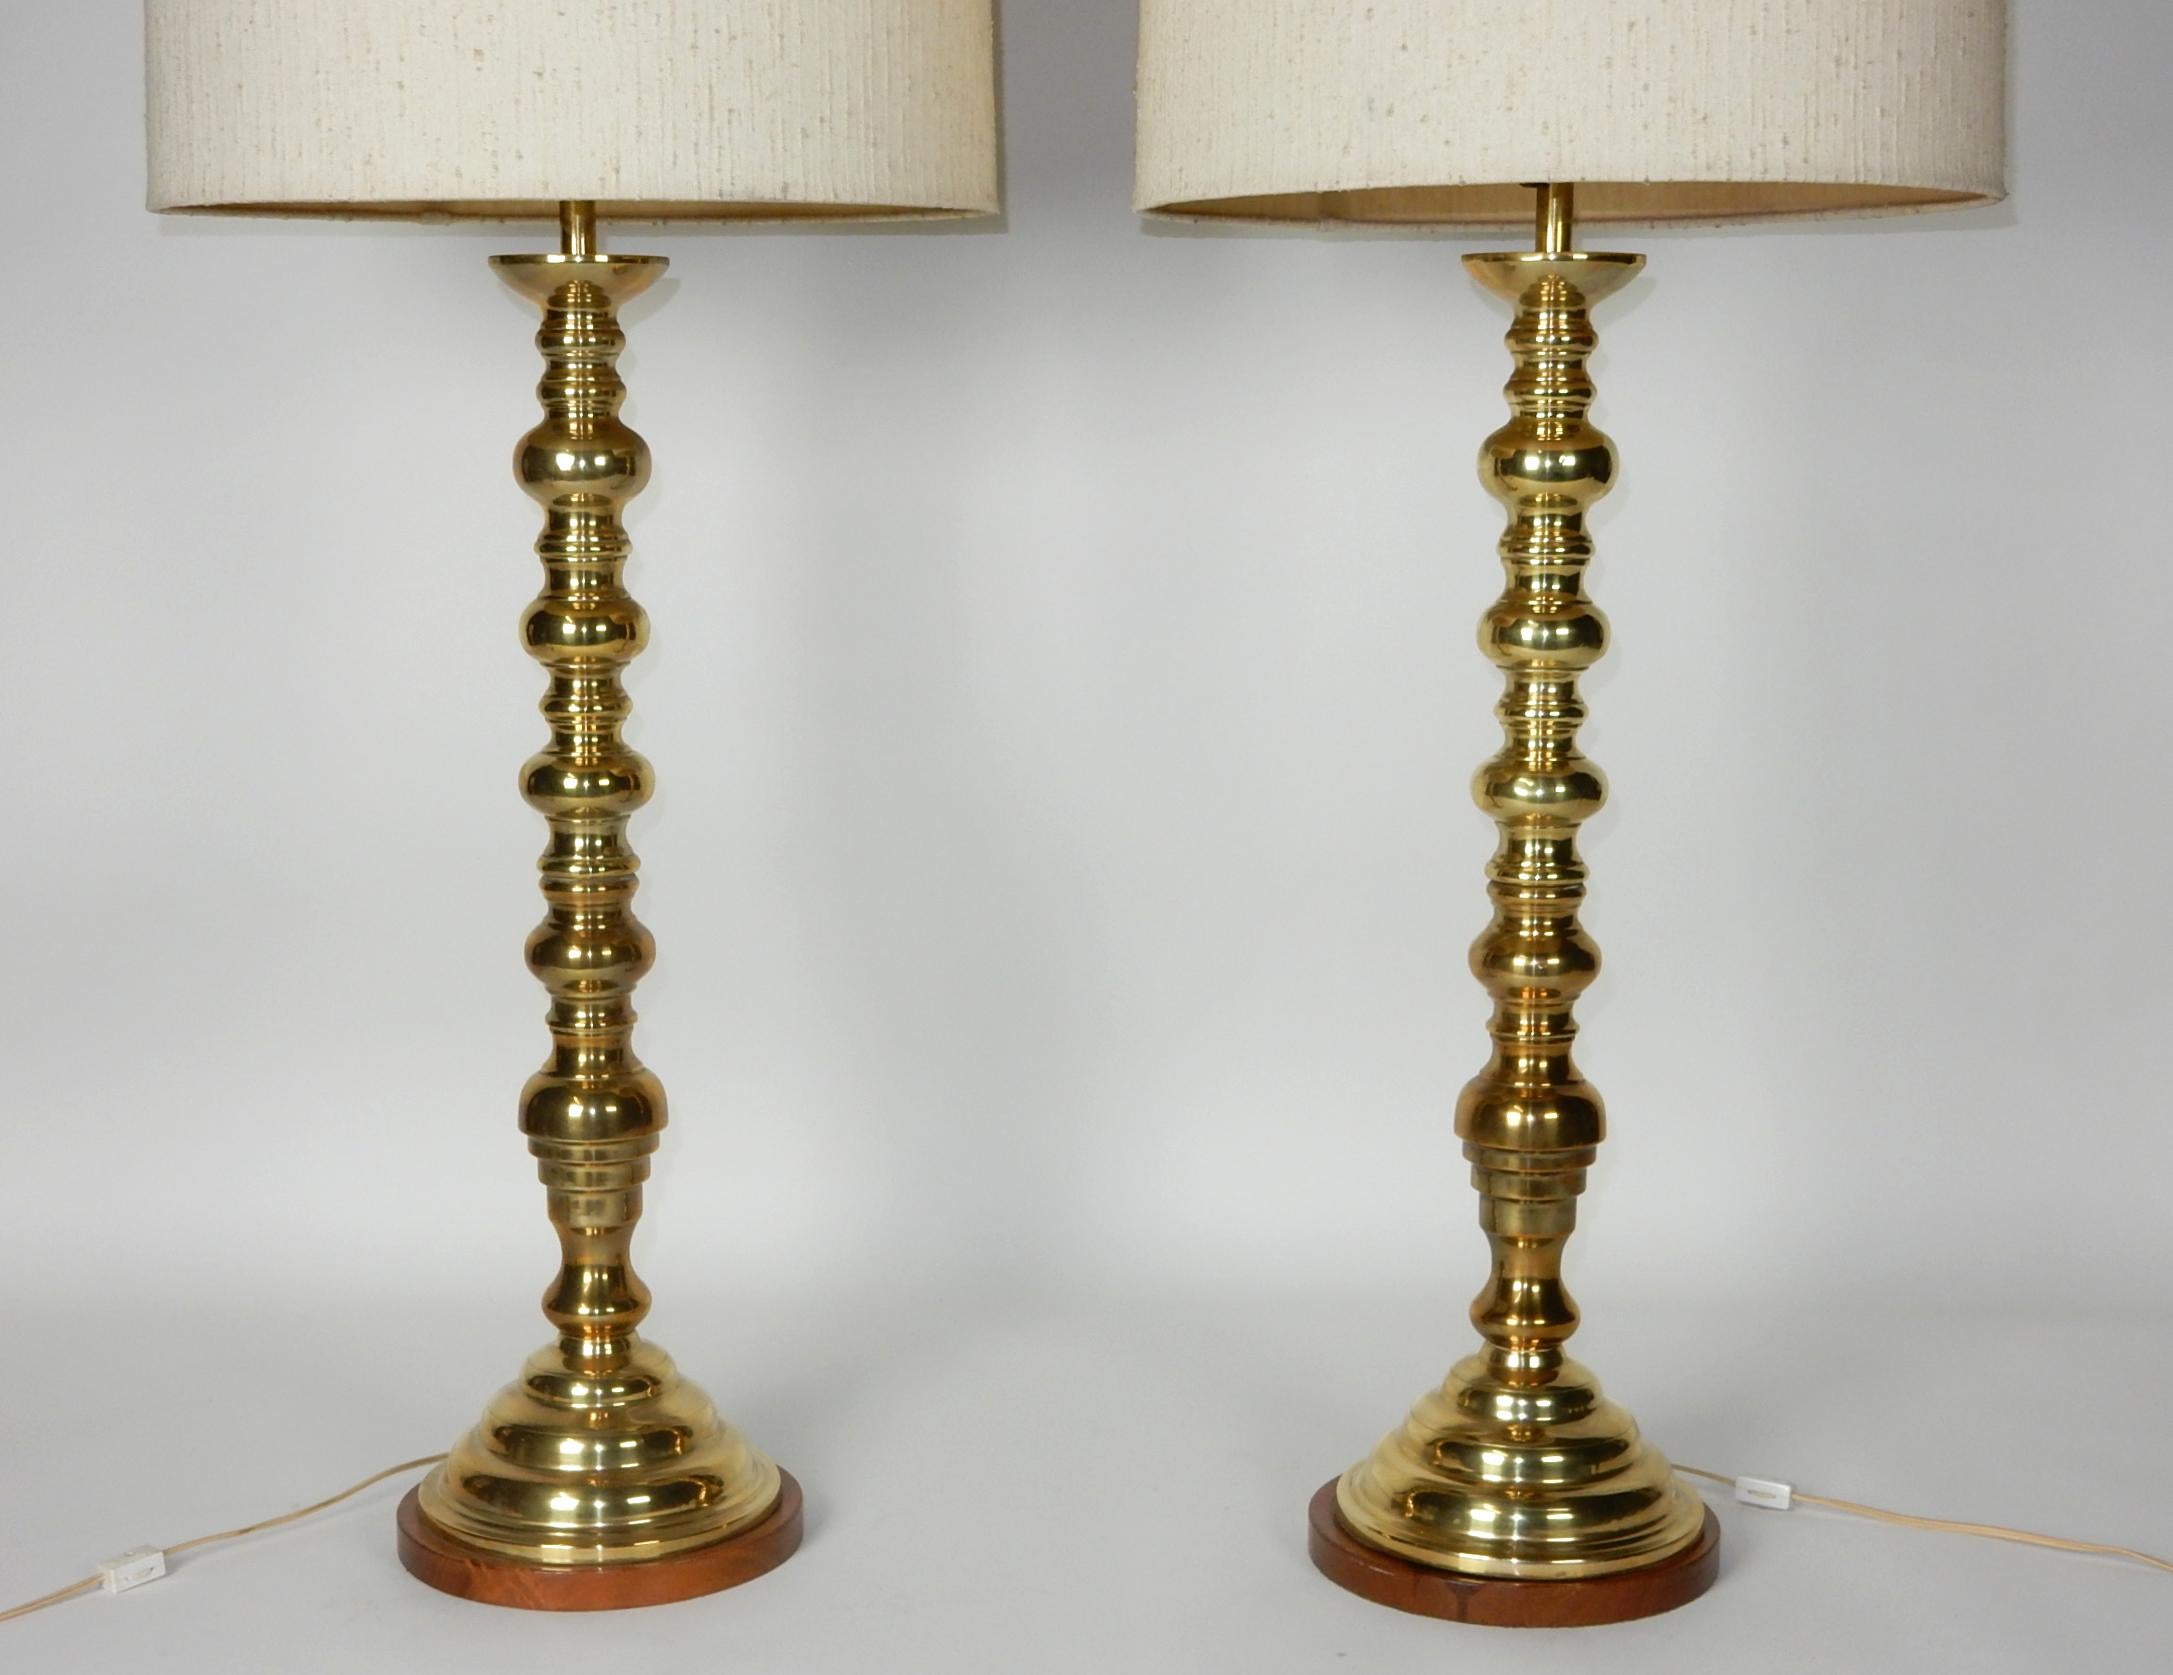 Art Deco Era Tall Brass Candlestick Table Lamps For Sale 1